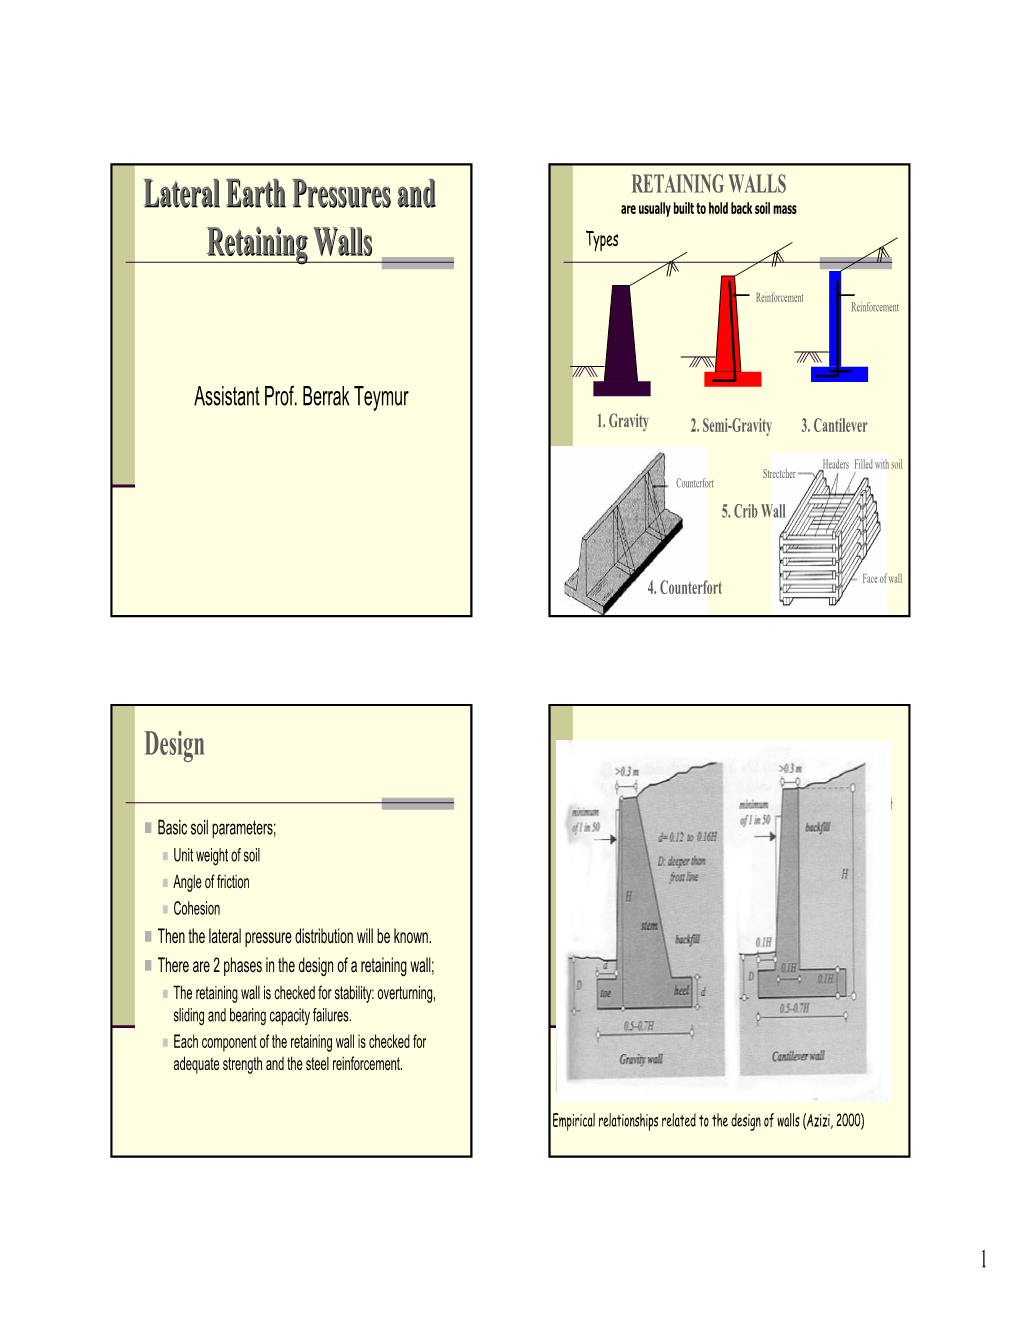 Lateral Earth Pressures and Retaining Walls